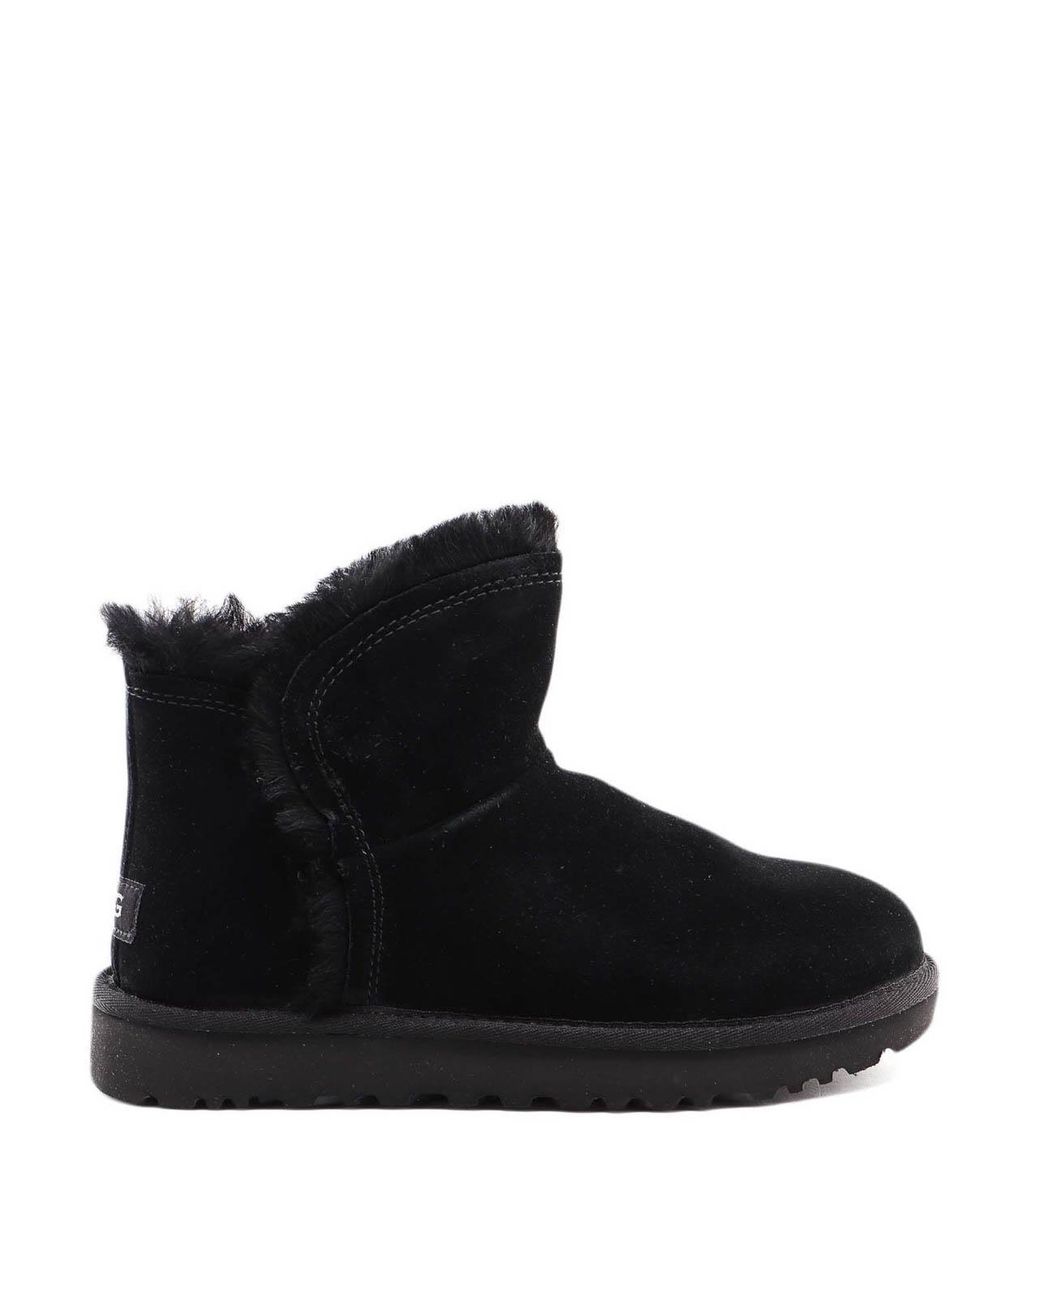 UGG Suede Classic Mini Fluff High-low Ankle Boots in Black - Lyst